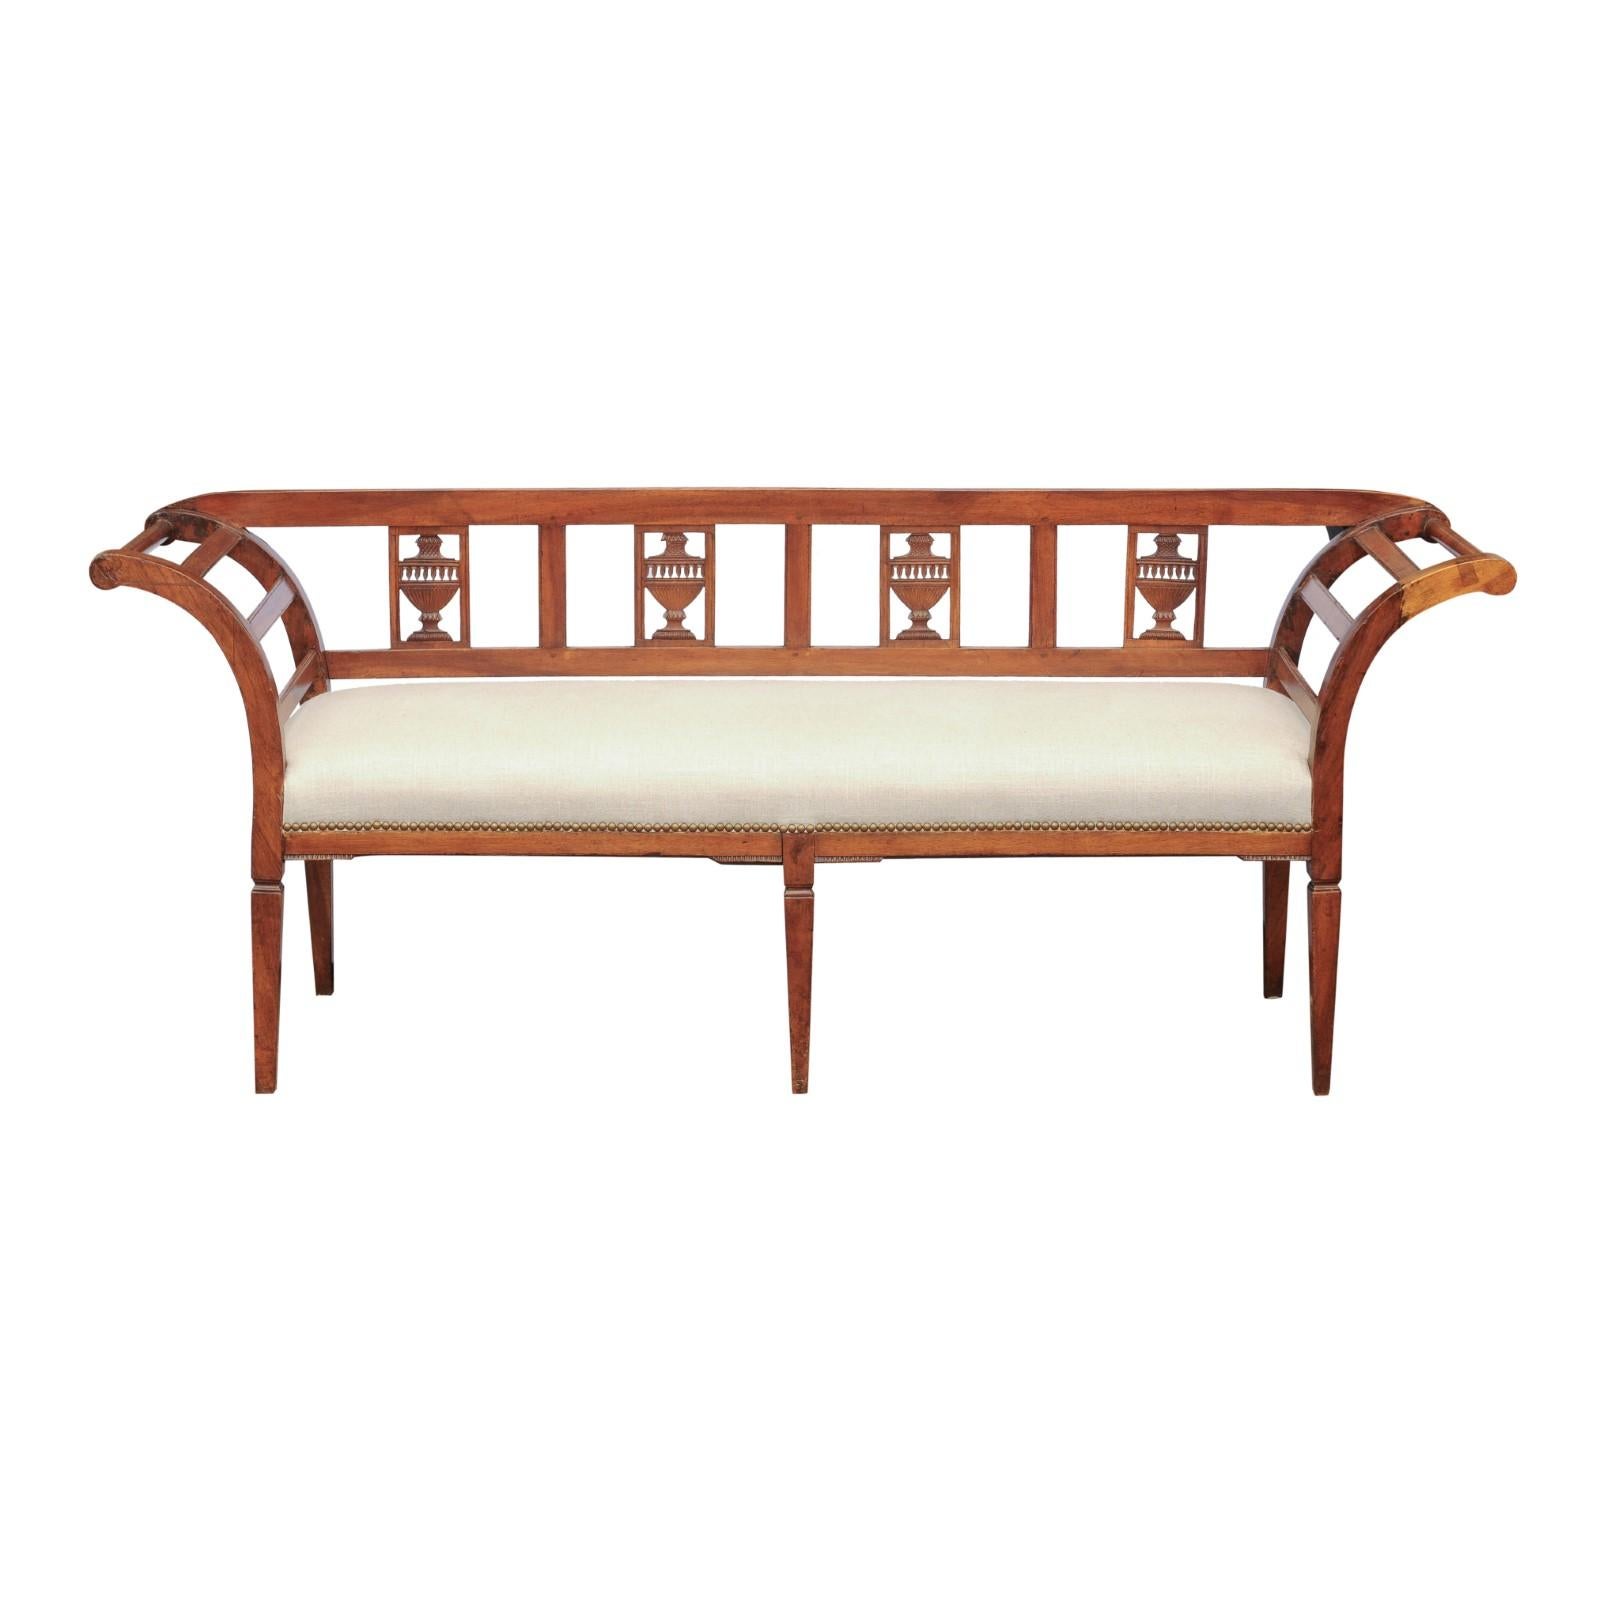 French 1870s Upholstered Fruitwood Settee with Carved Urns and Outscrolling Arms